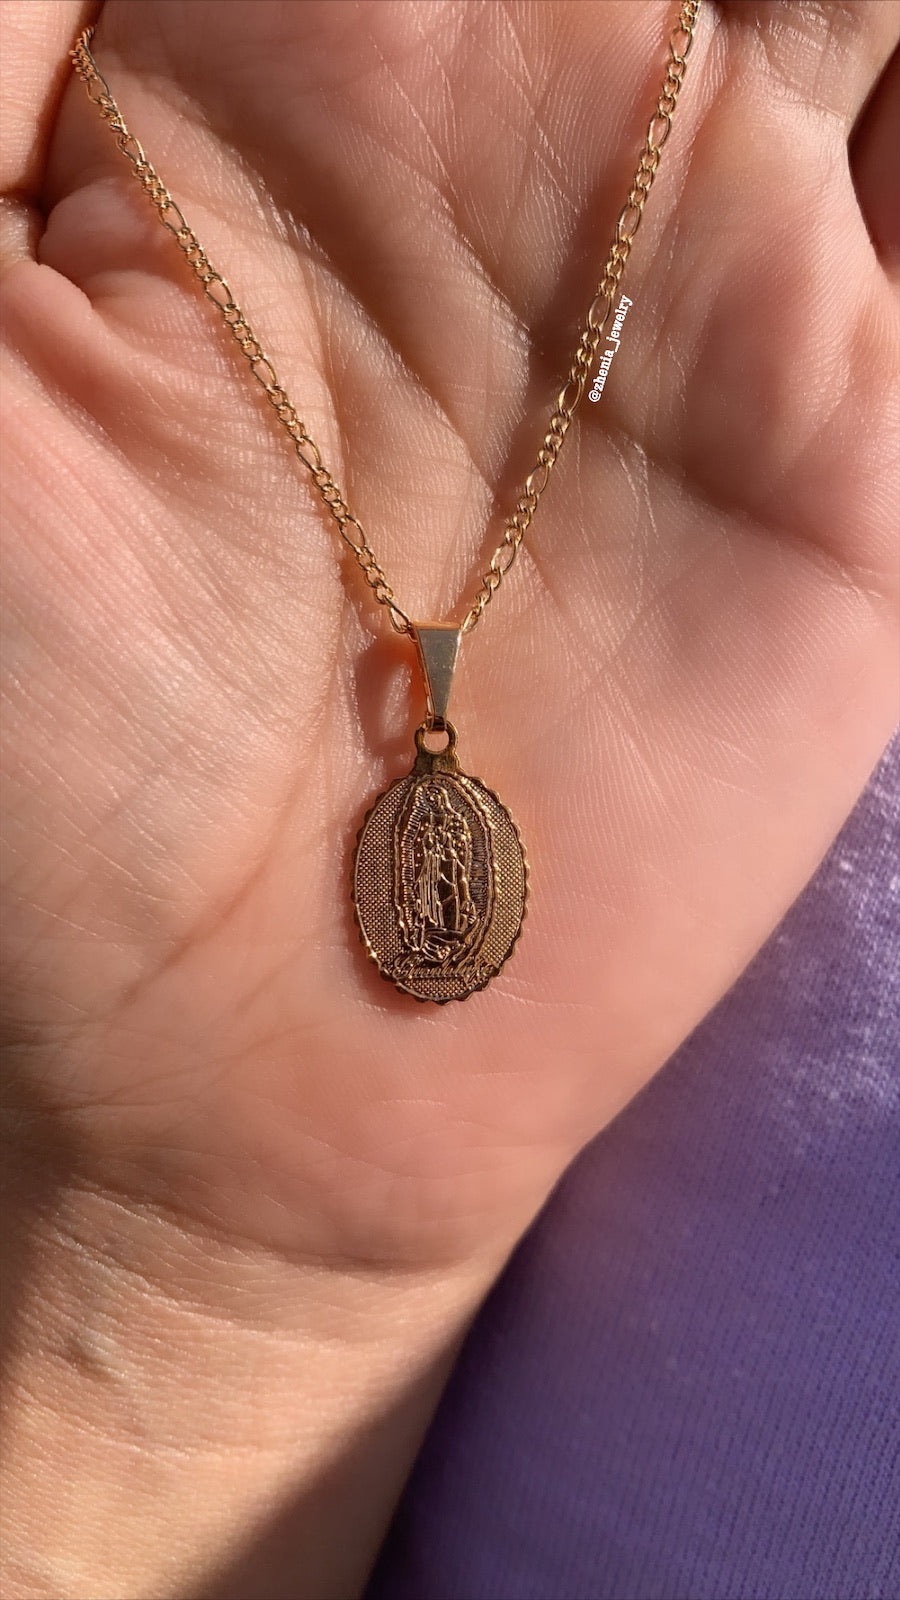 Guadalupe necklace